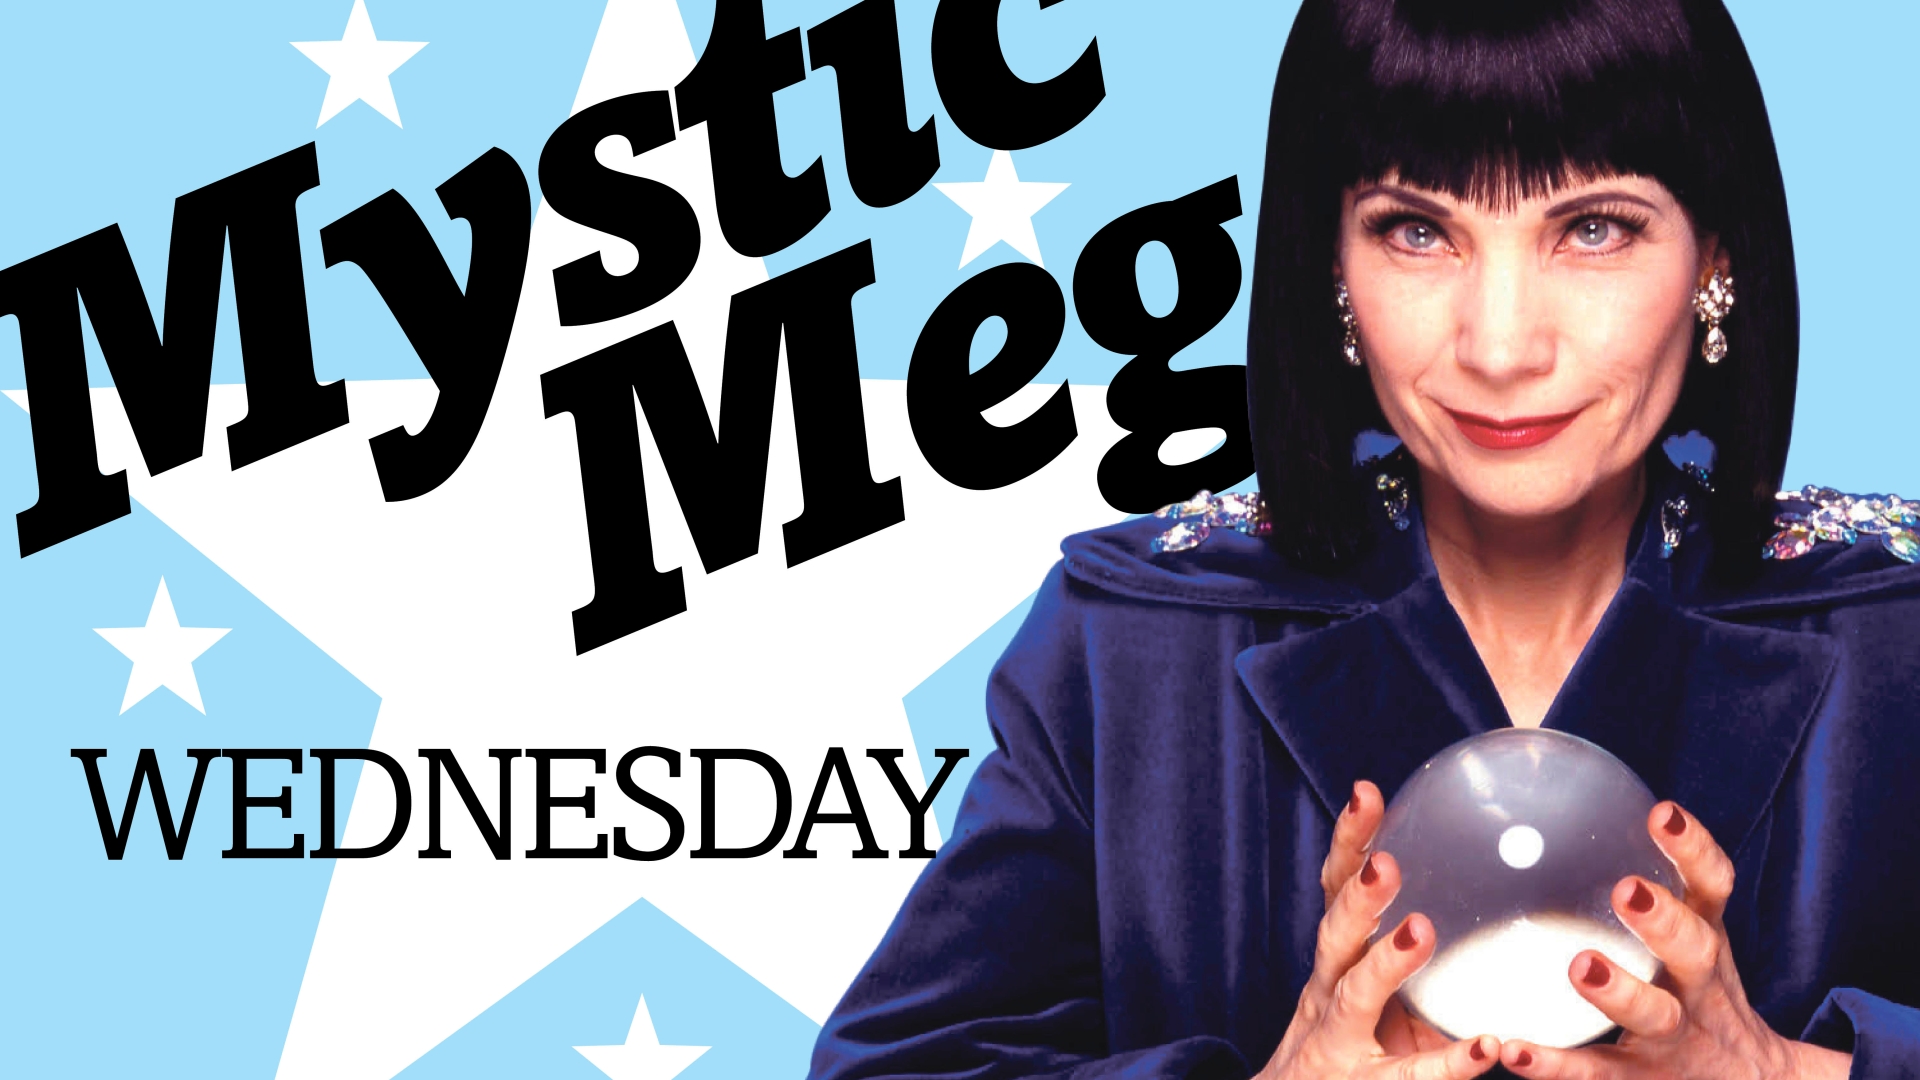 Today’s Horoscope: A daily star sign guide from Mystic Med on October 19